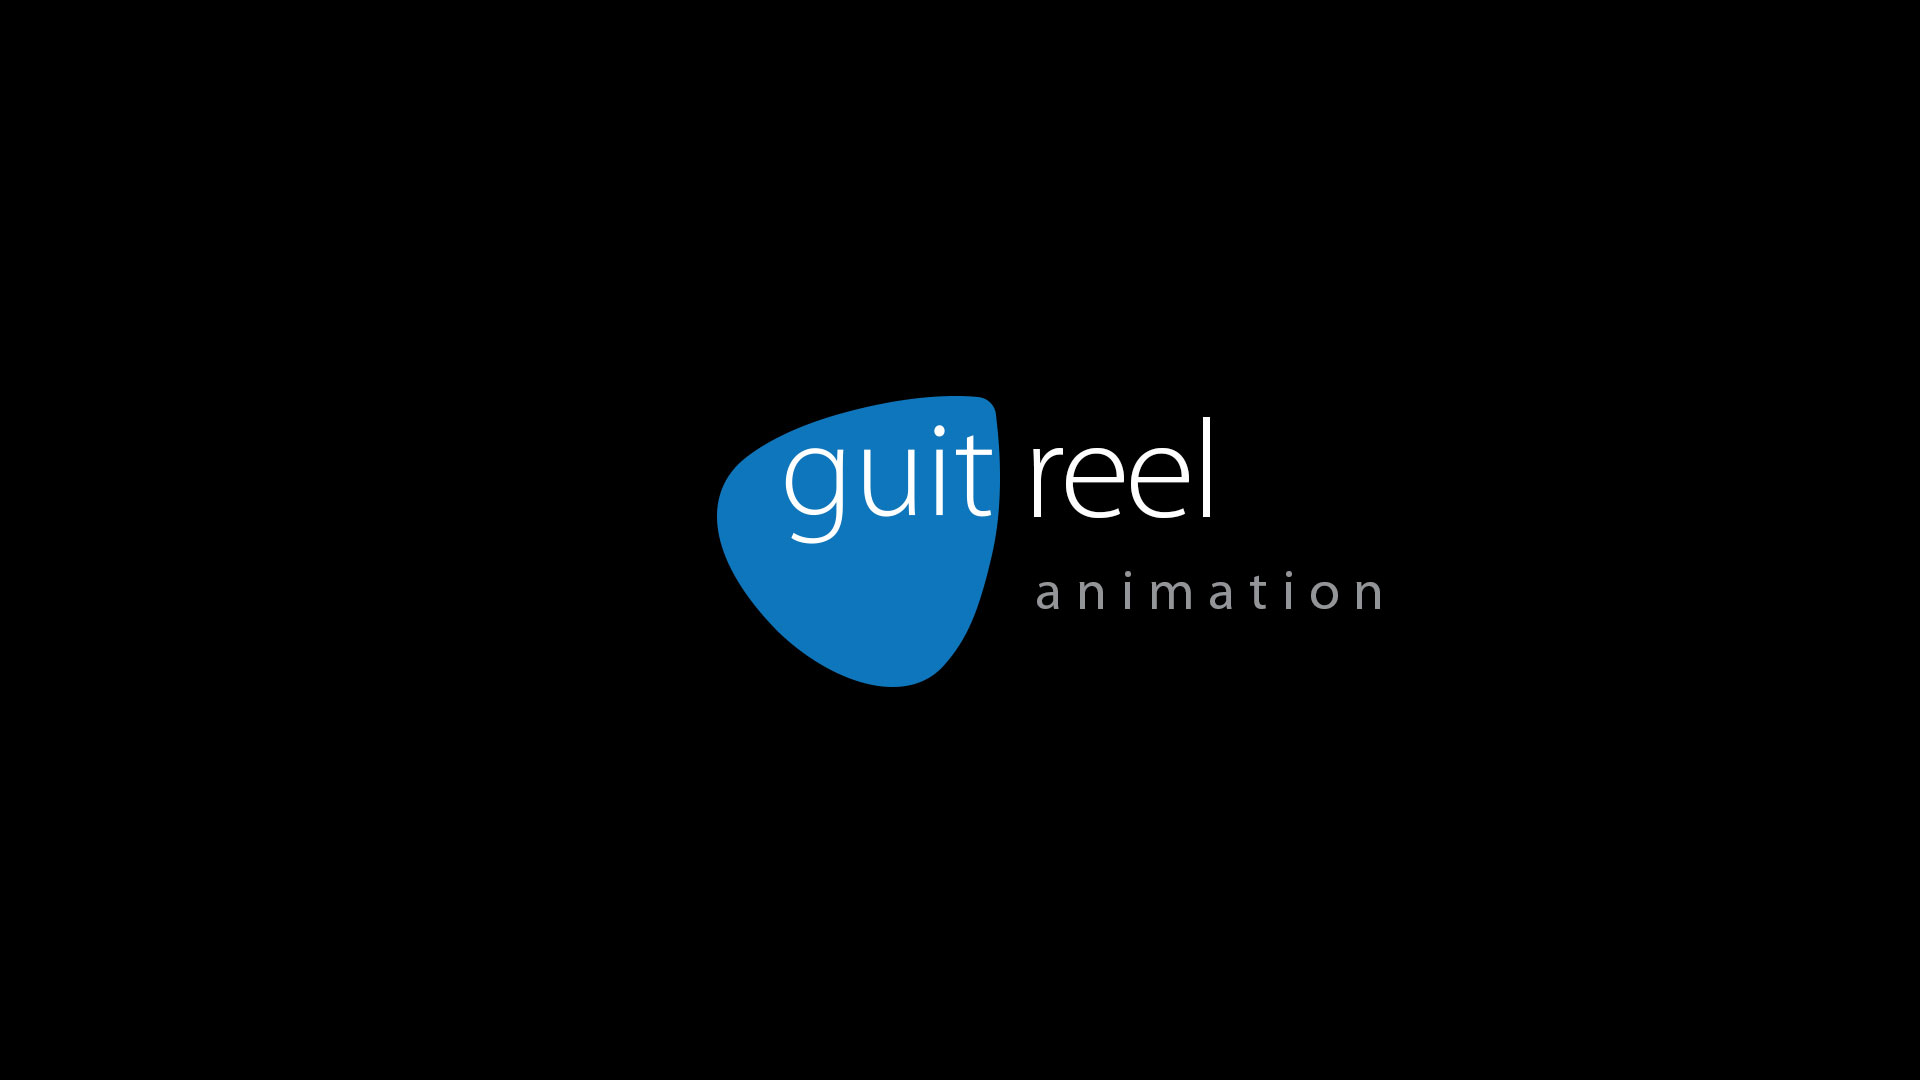 A black background with the words guit reel animation in blue.